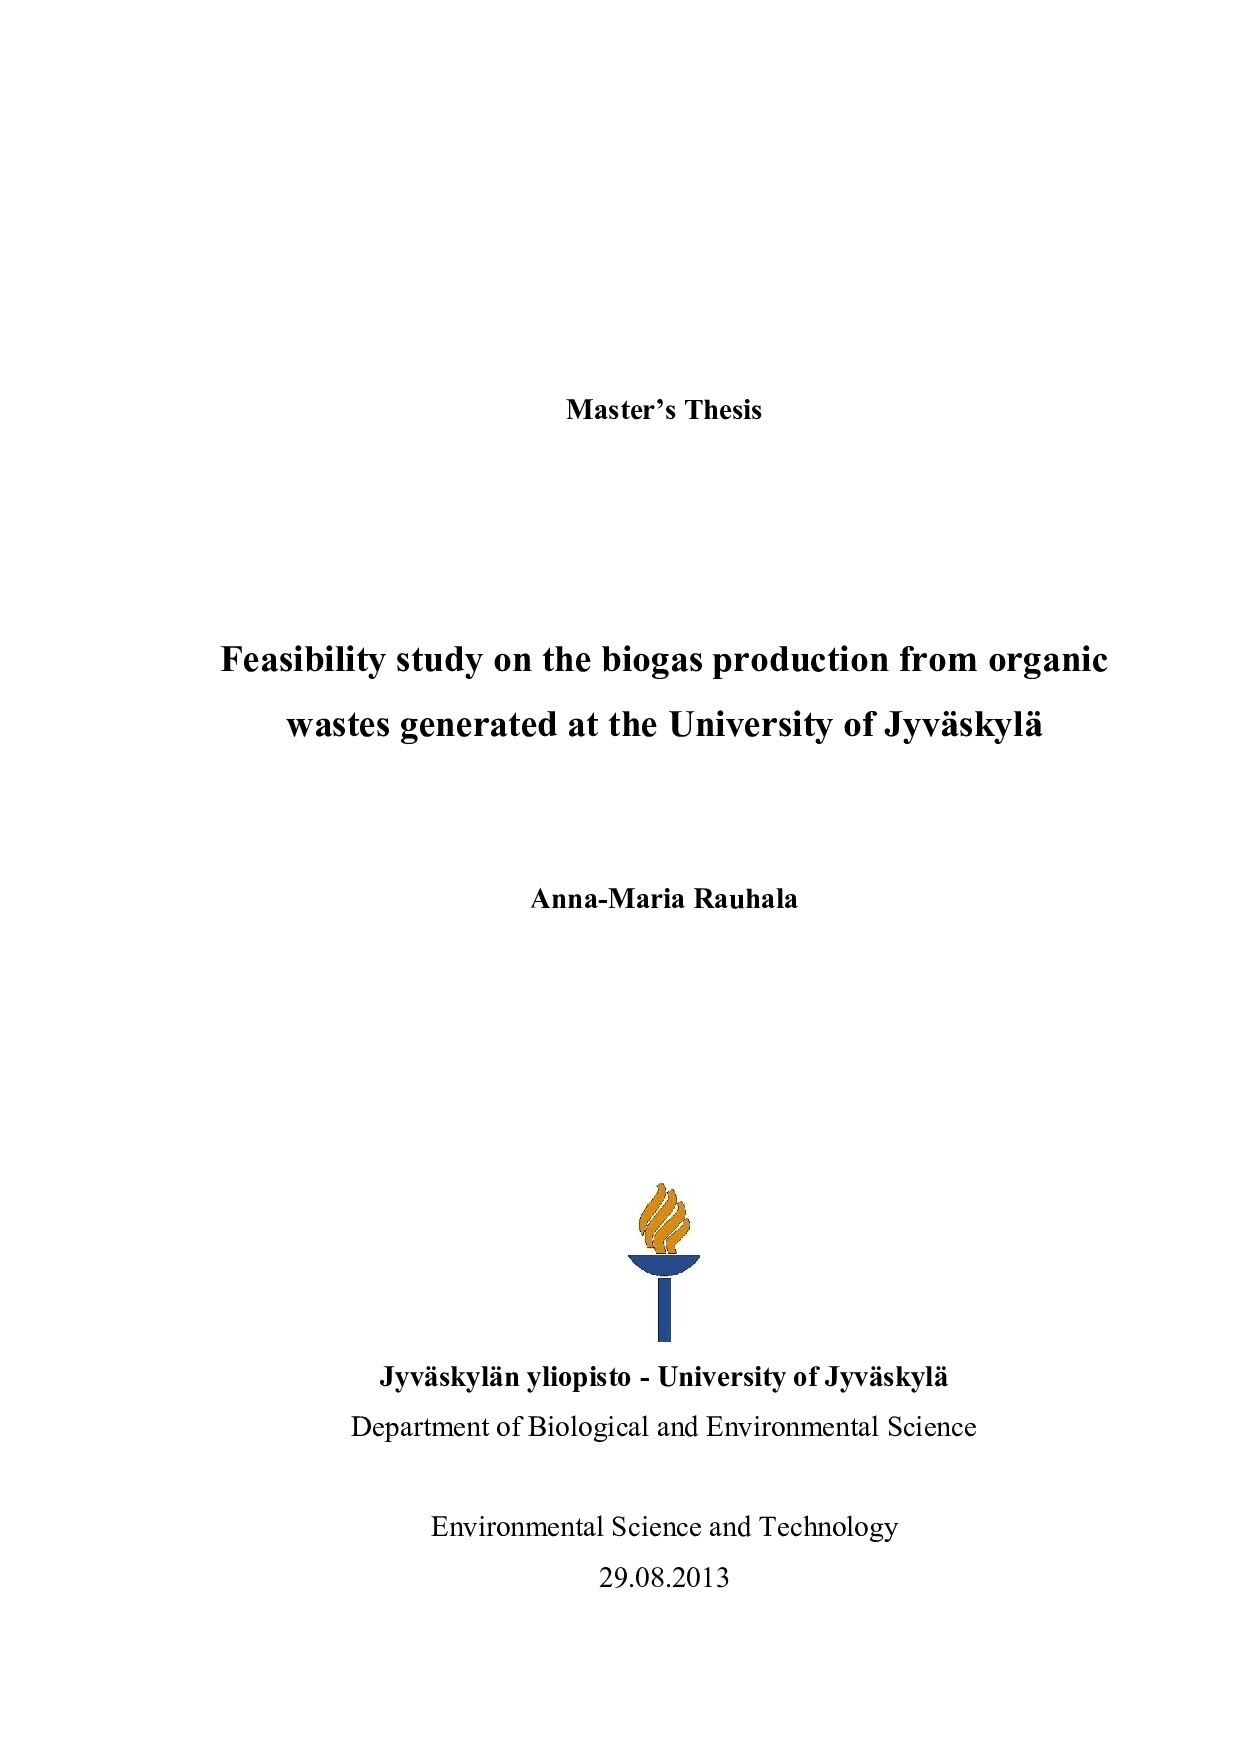 Feasibility study on biogas production from organic wastes generated at University of Jyväskylä